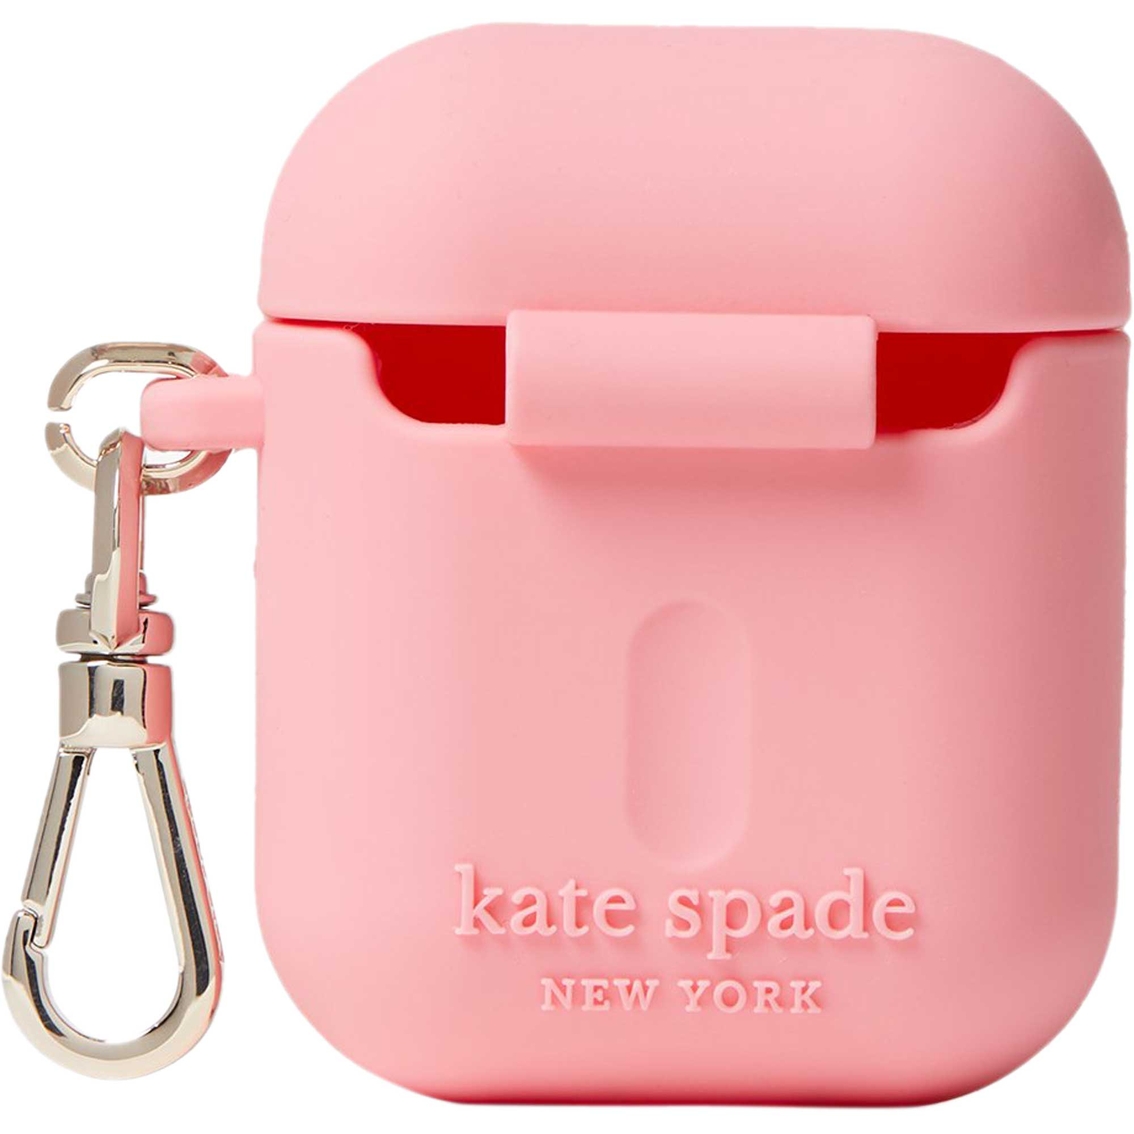 Kate Spade New York Airpod Case - Image 2 of 4